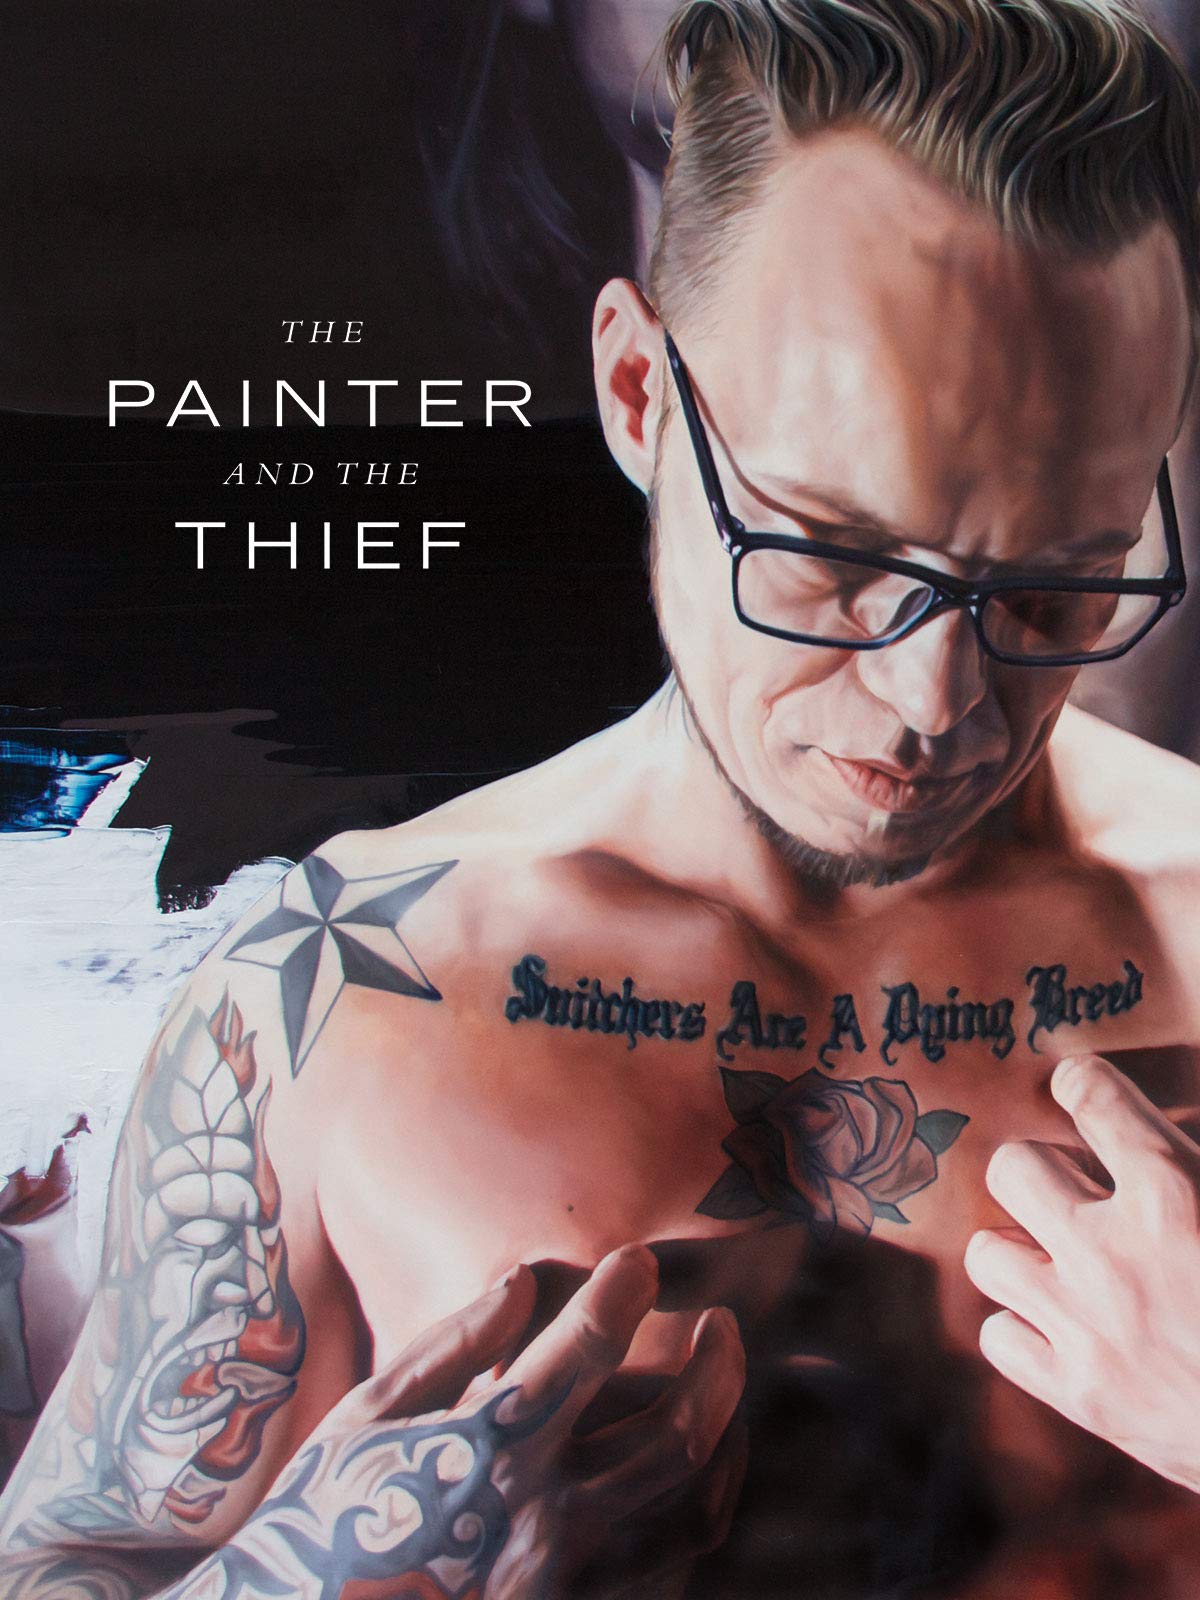 Poster for The Painter and the Thief documentary